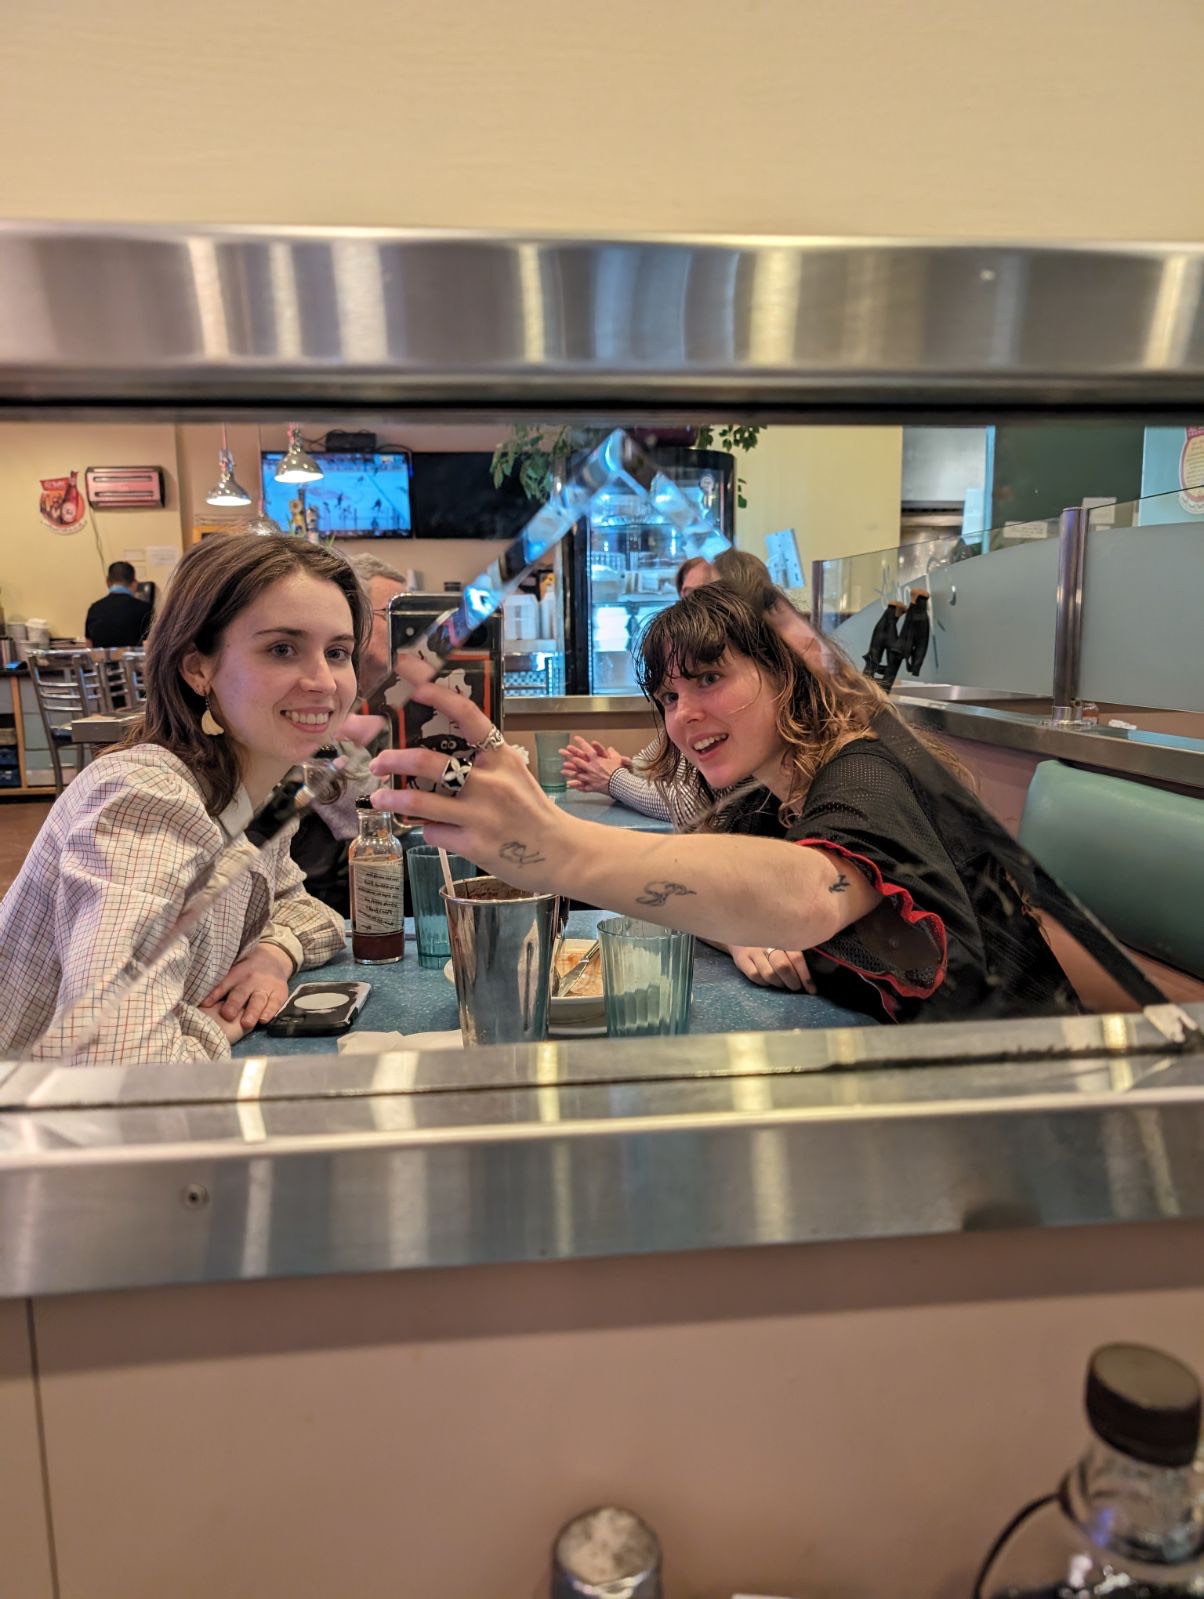 Two friends take a mirror selfie while sitting at a booth table.